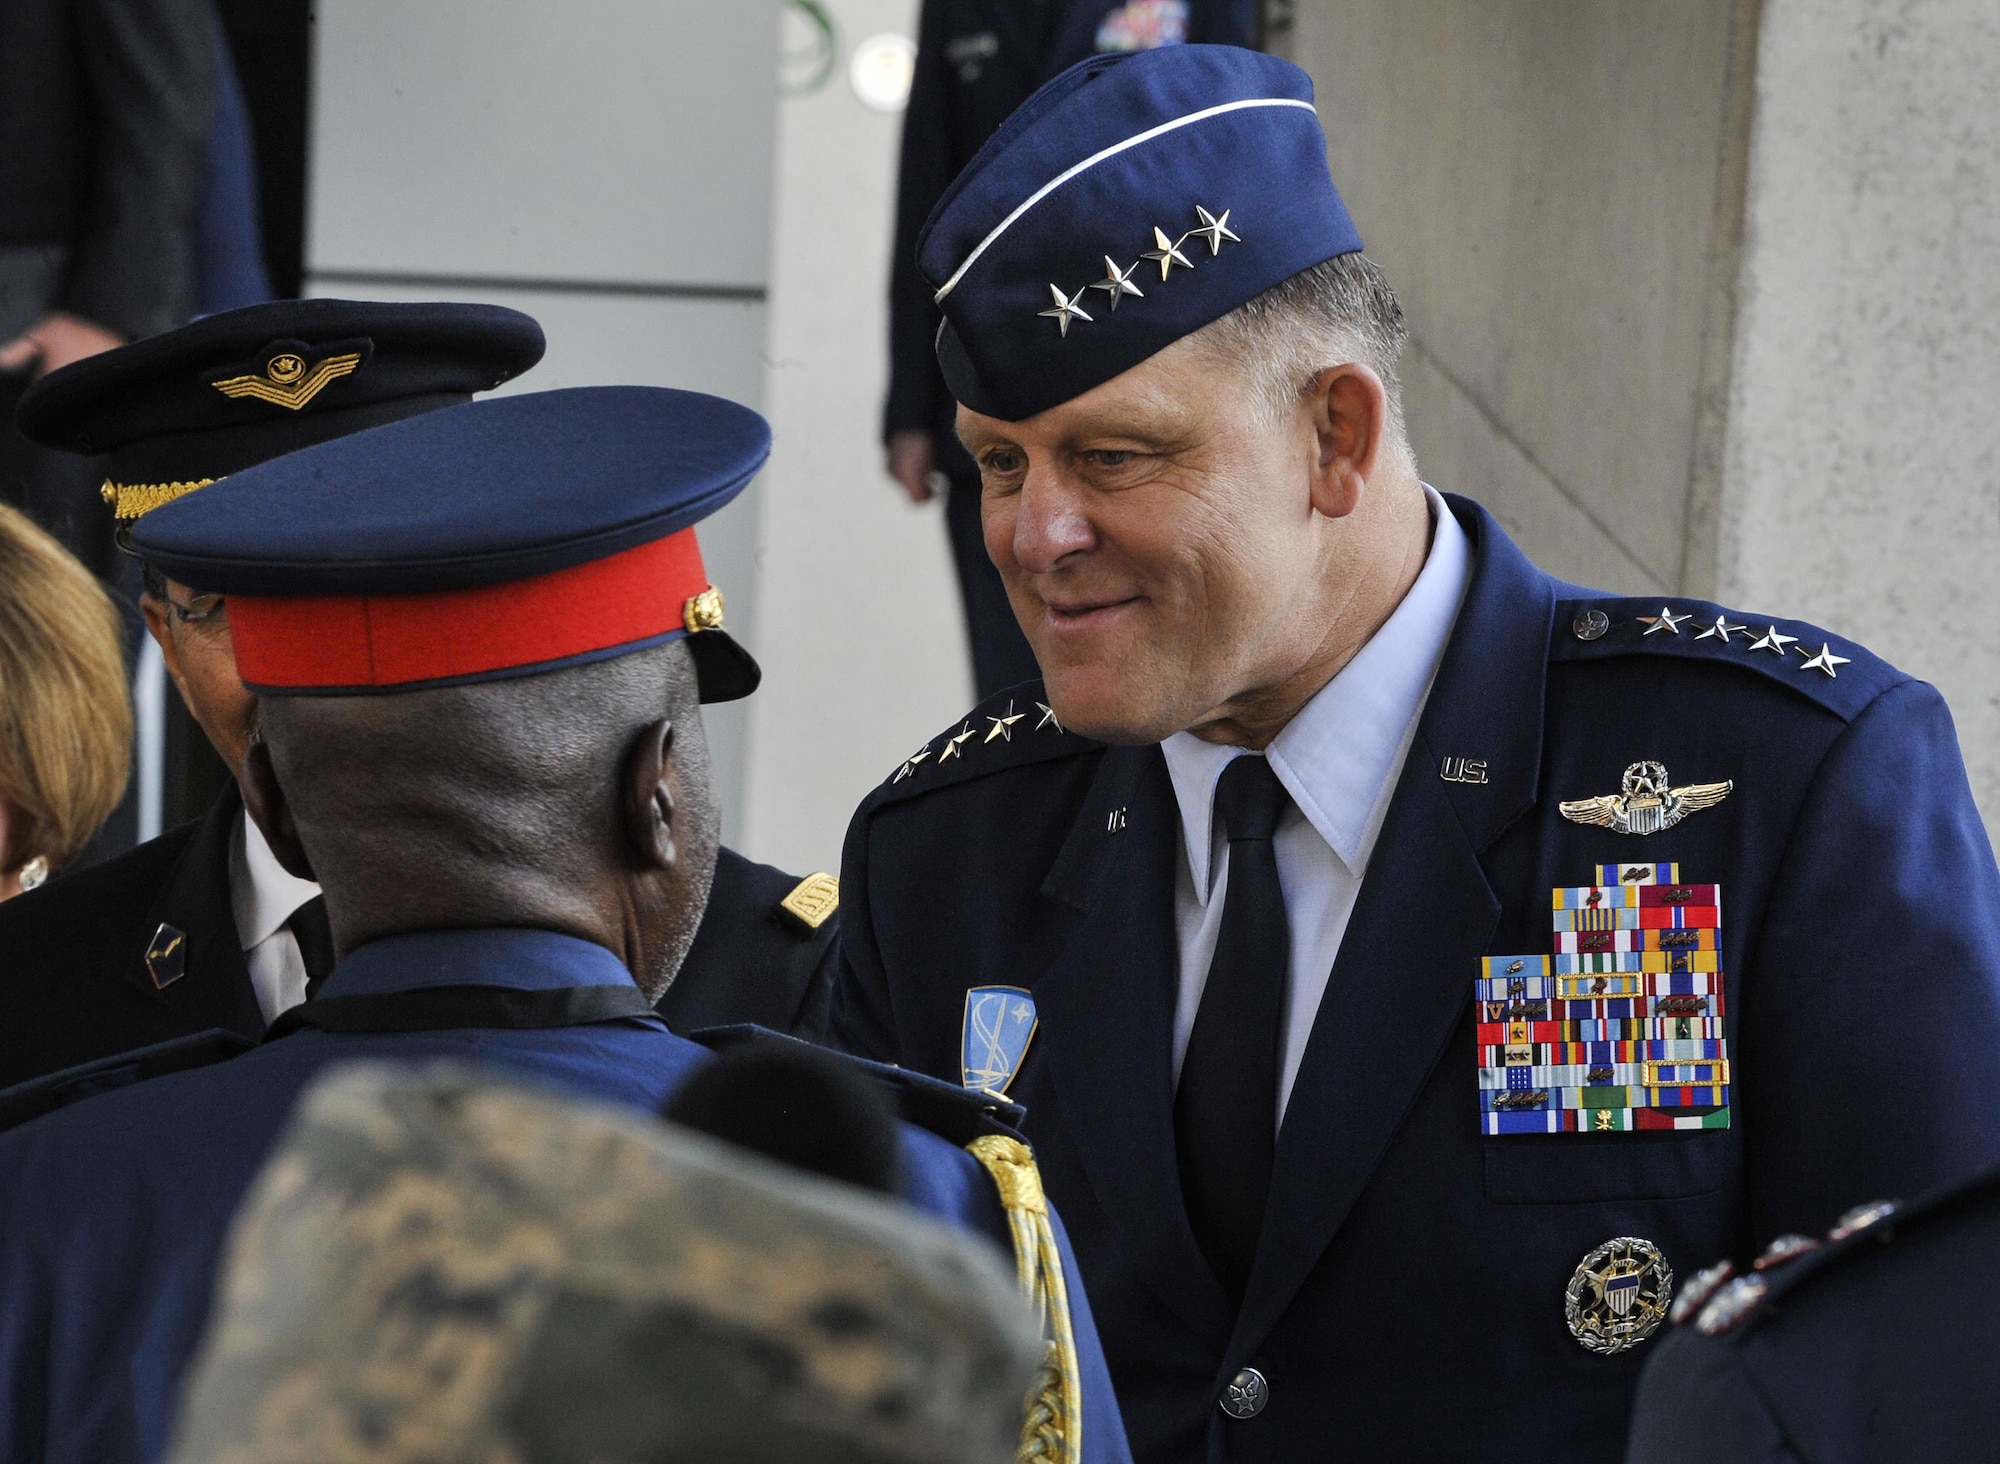 Gen. Frank Gorenc, U.S. Air Forces in Europe Air Forces Africa commander, greets African Air Chiefs during an African Air Chiefs Symposium May 9, 2016, at Ramstein Air Base, Germany. Leaders from African countries met for the symposium to form bonds and working relationships while discussing topics pertinent to the future of their countries. (U.S. Air Force photo/Senior Airman Larissa Greatwood)